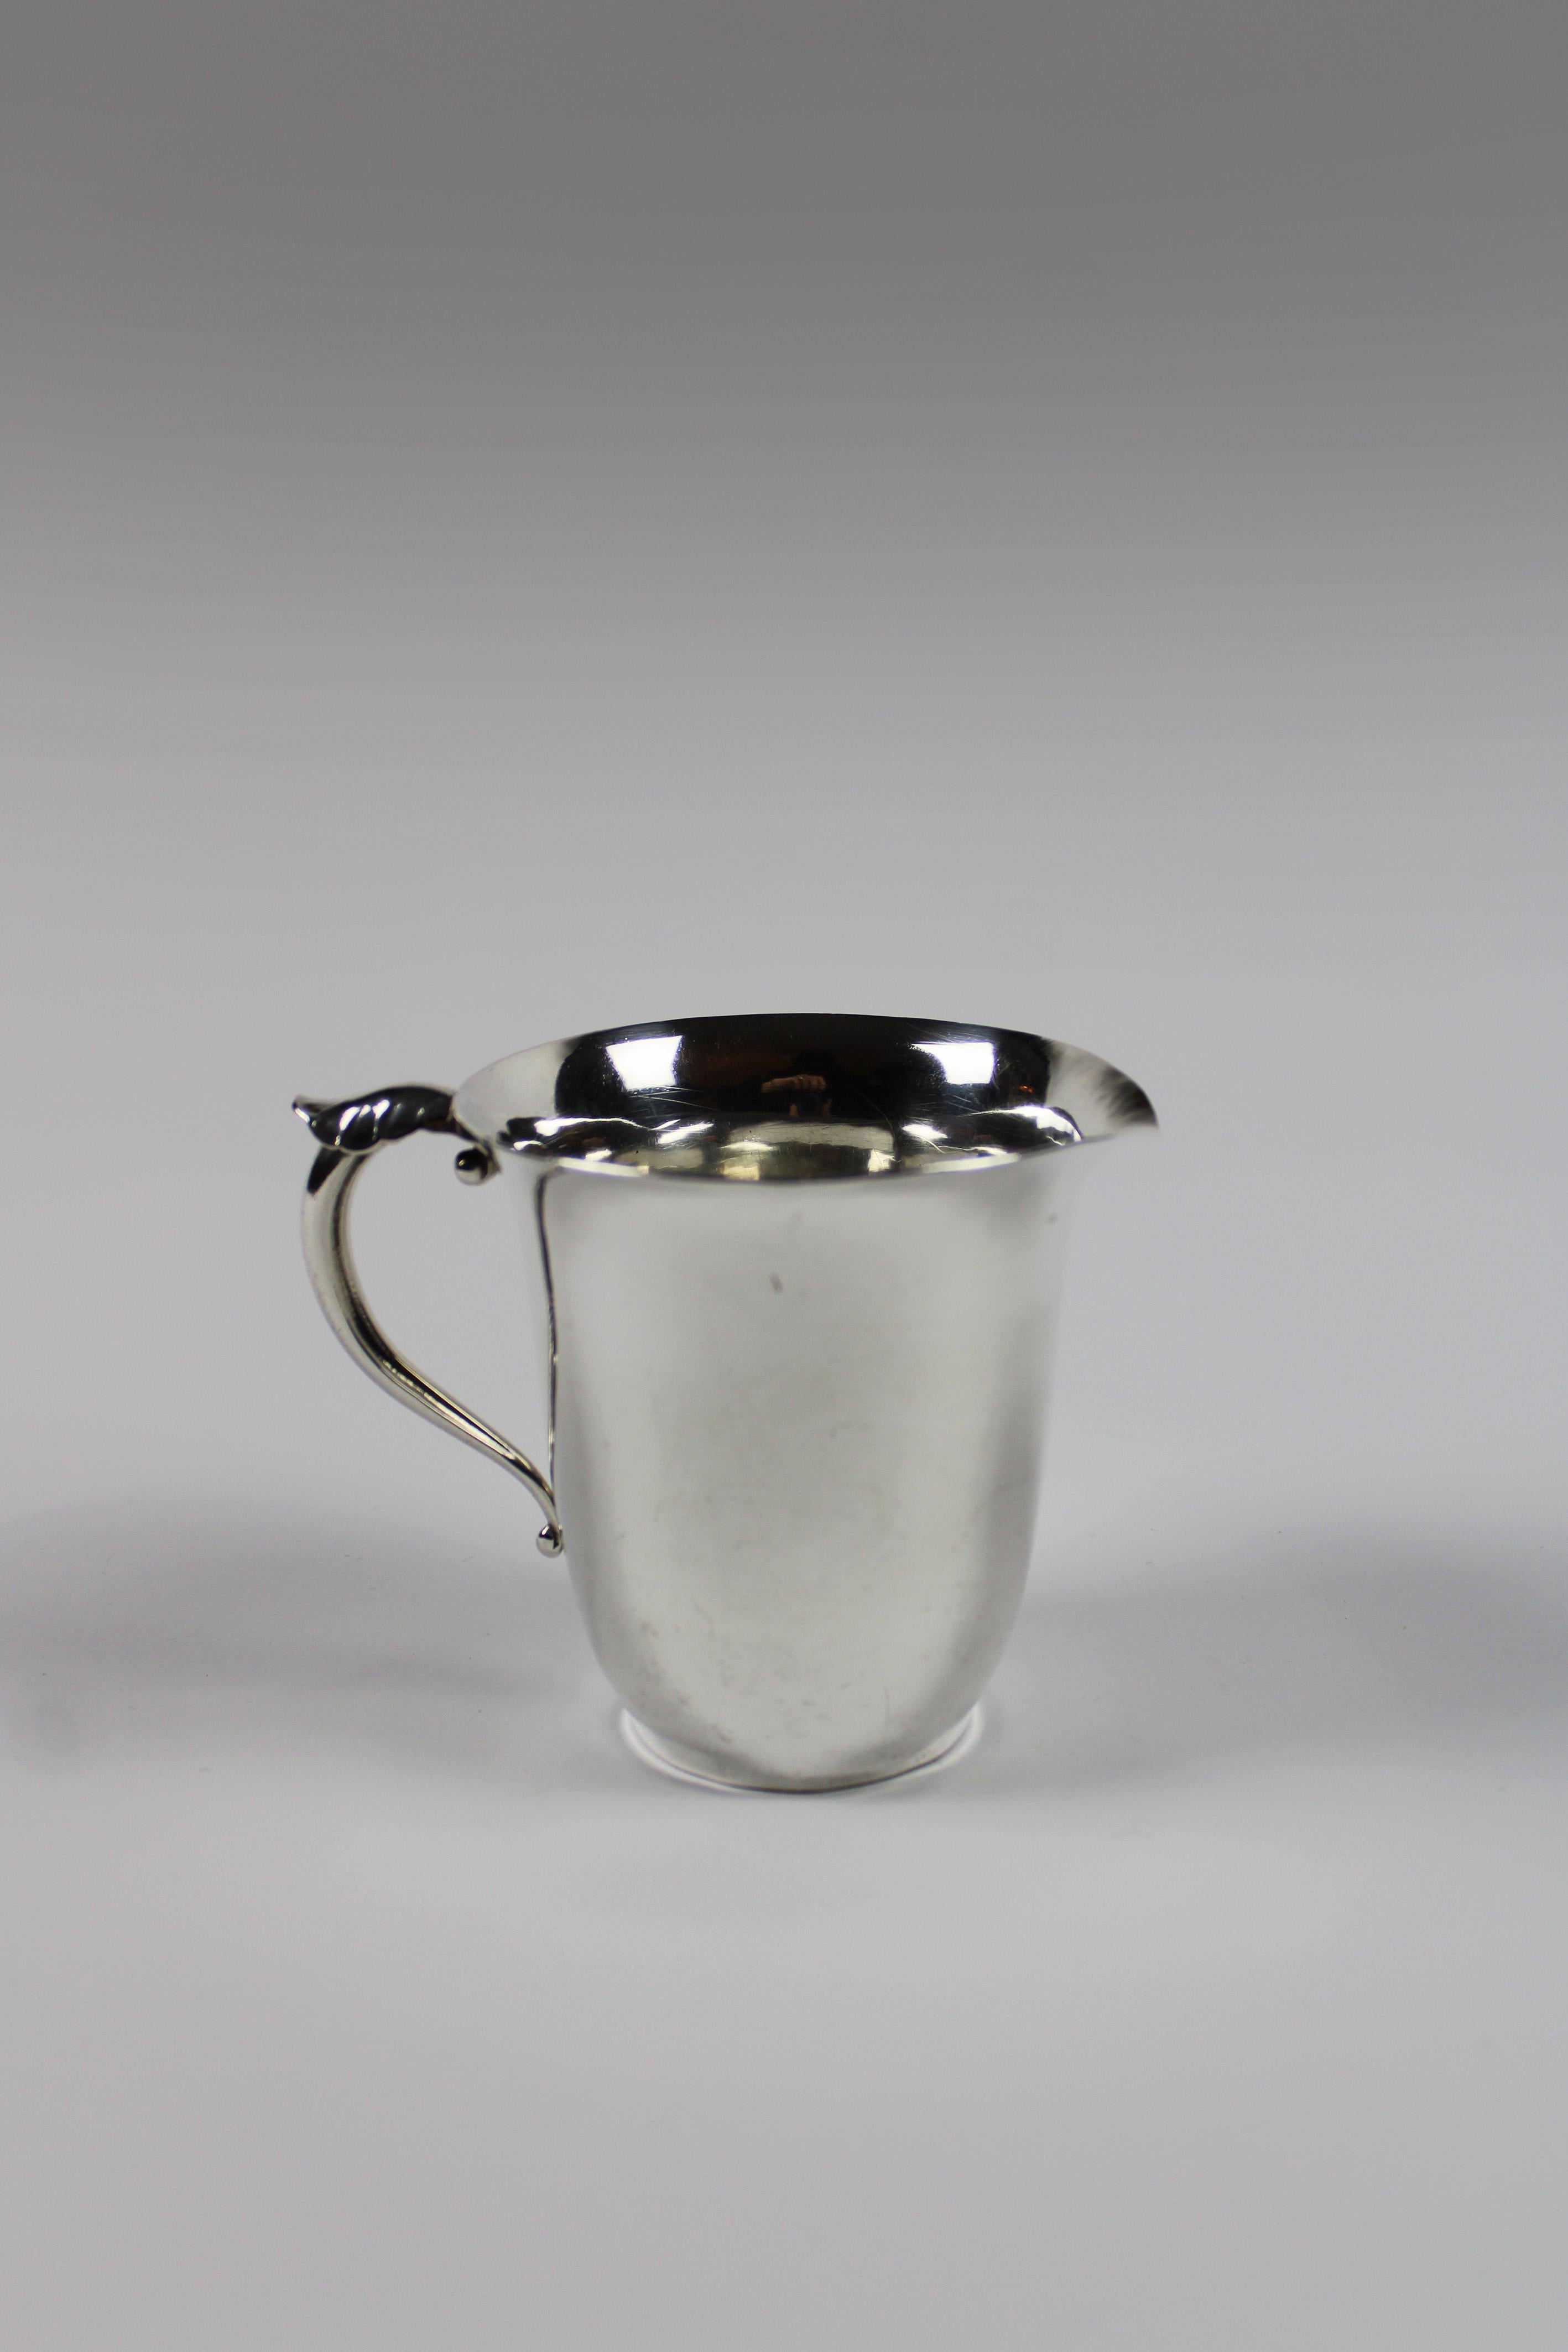 Hammered Silver Cream Jug Georg Jensen Sterling Silver Cup by Harald Nielsen 1938 Denmark For Sale